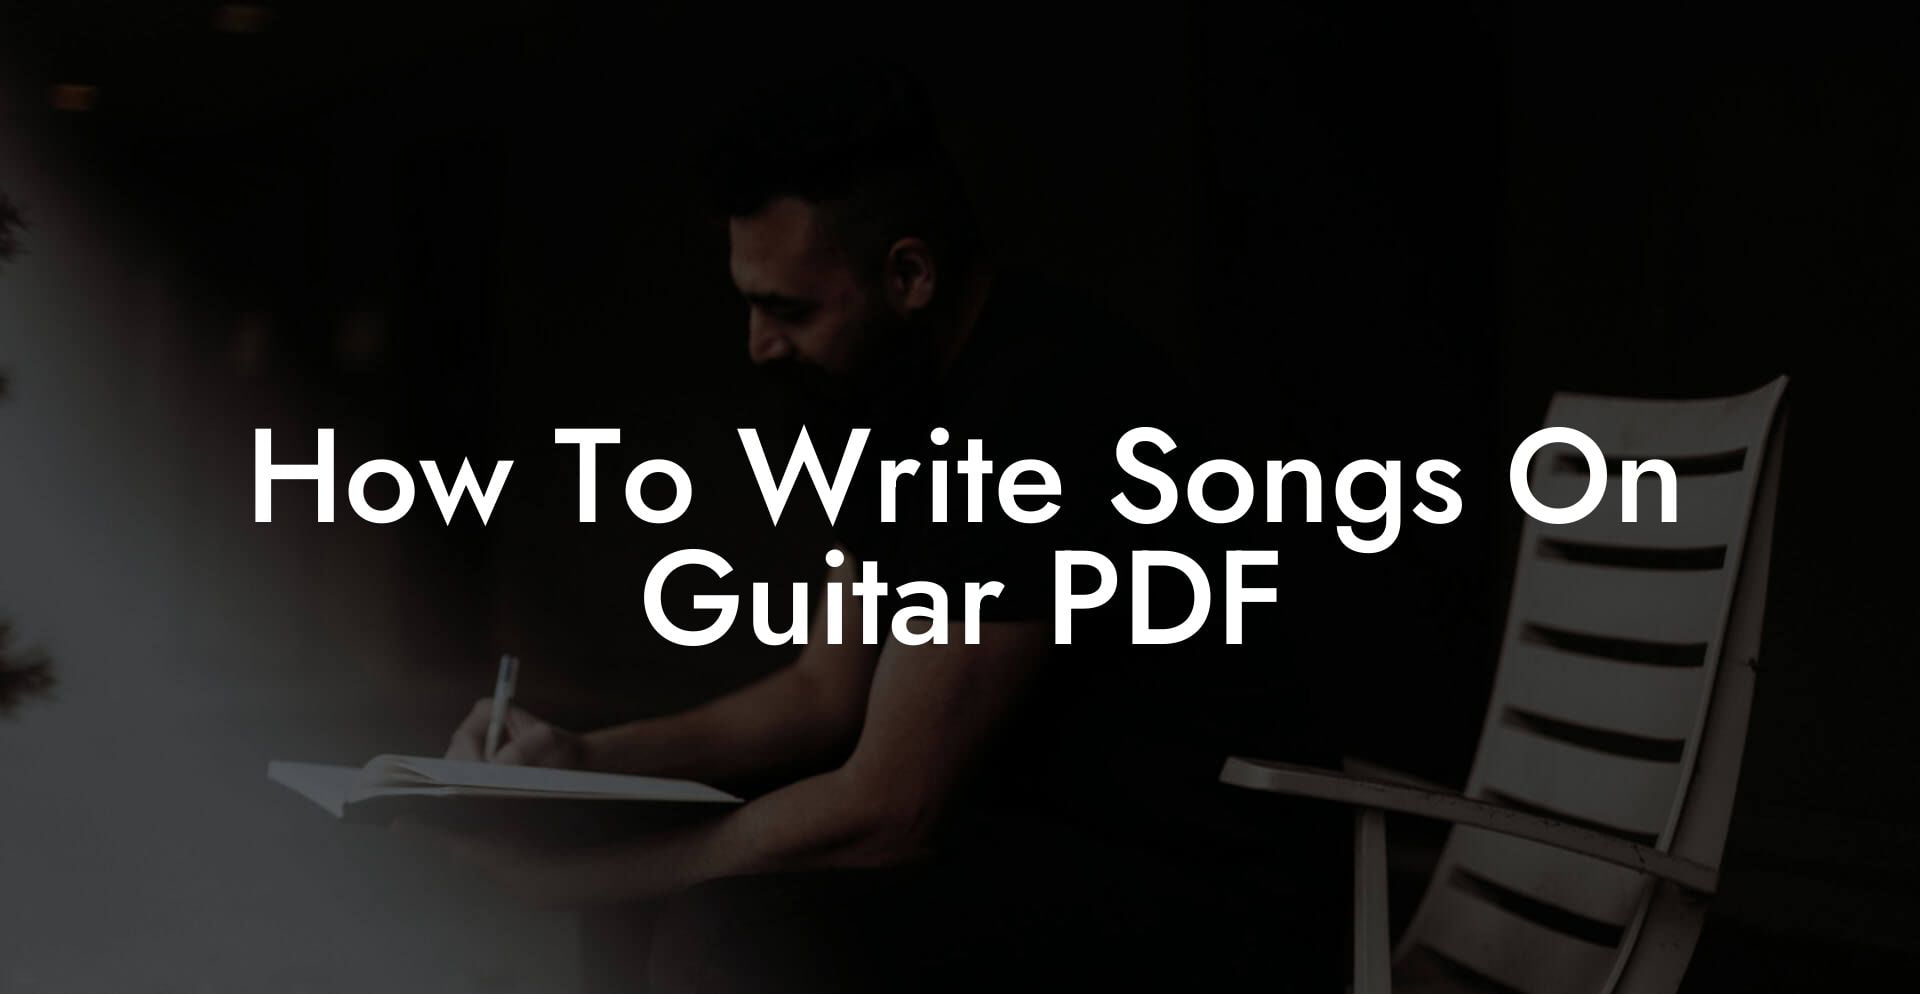 how to write songs on guitar pdf lyric assistant